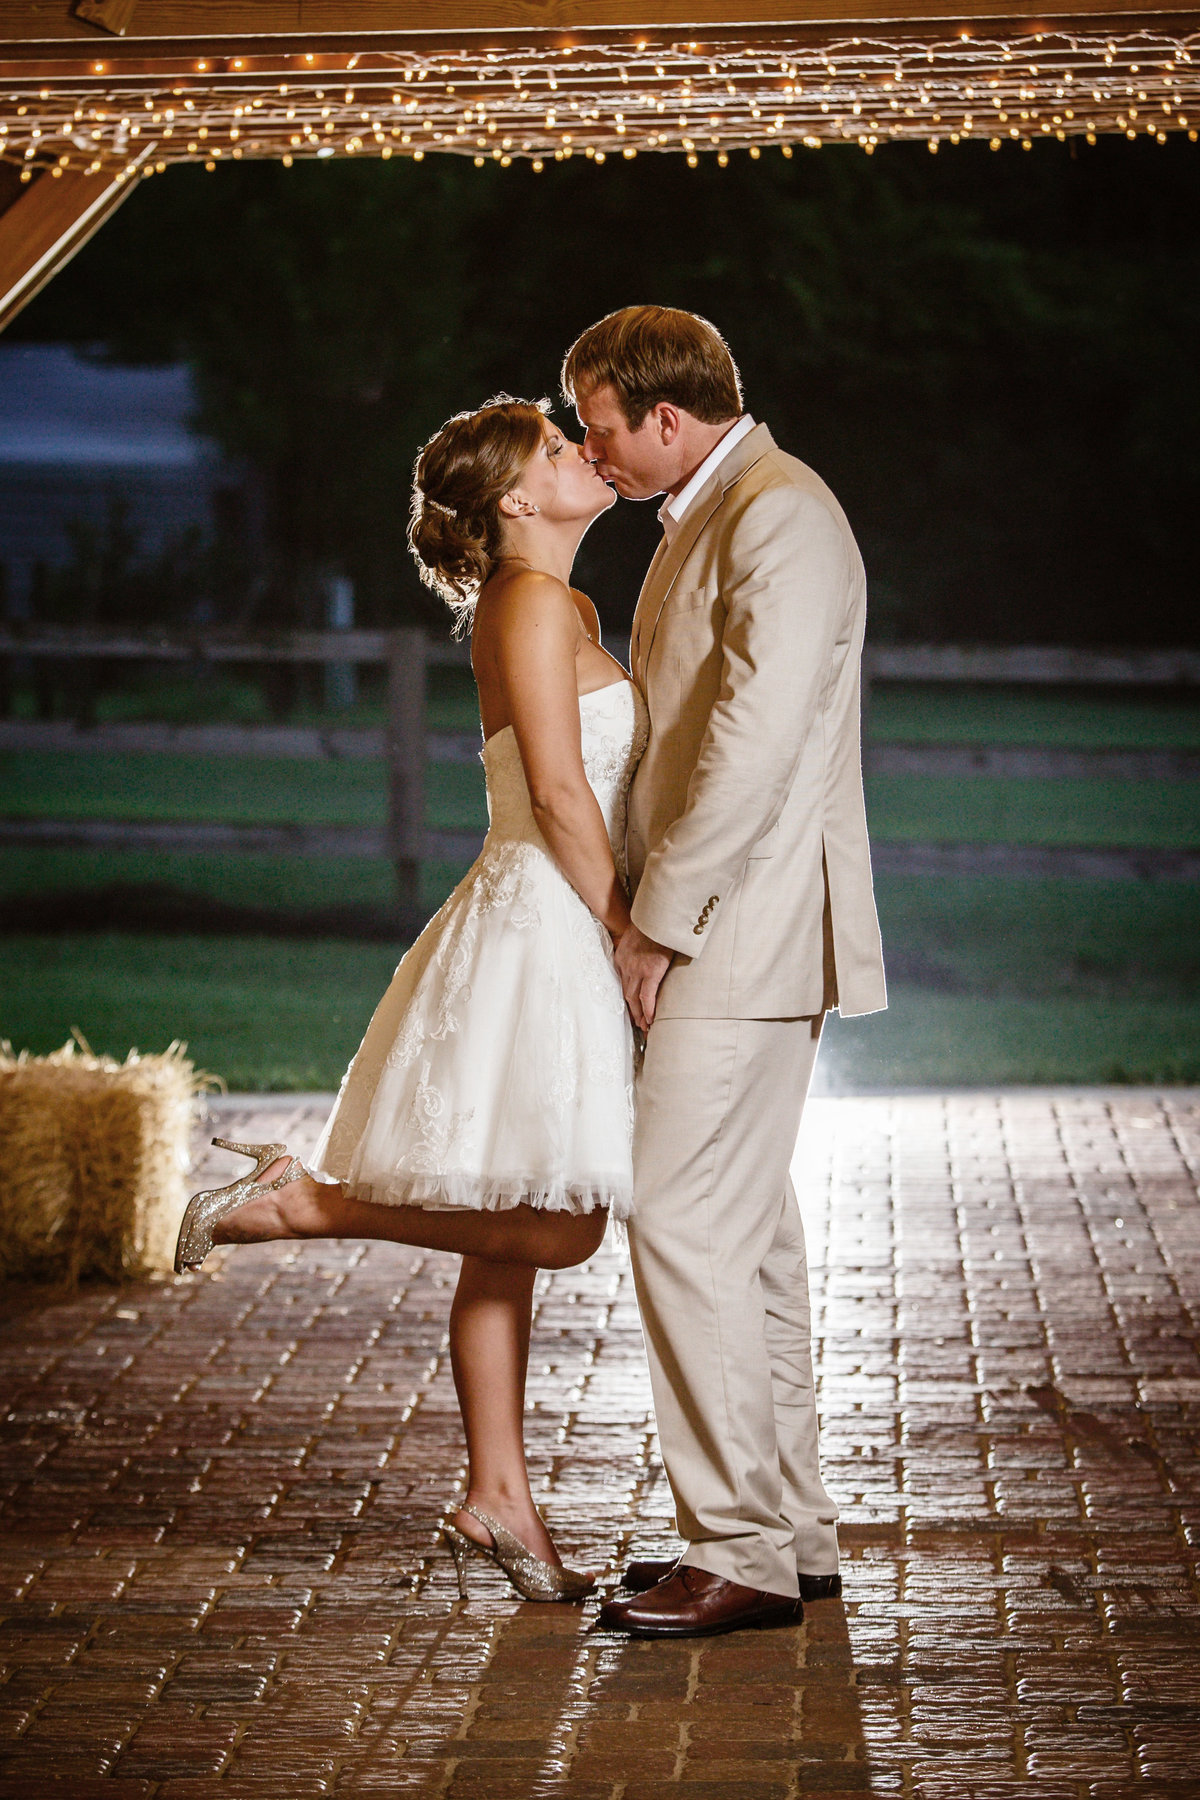 Couple photo session at Kalioka Stables in Eight Mile, Alabama.